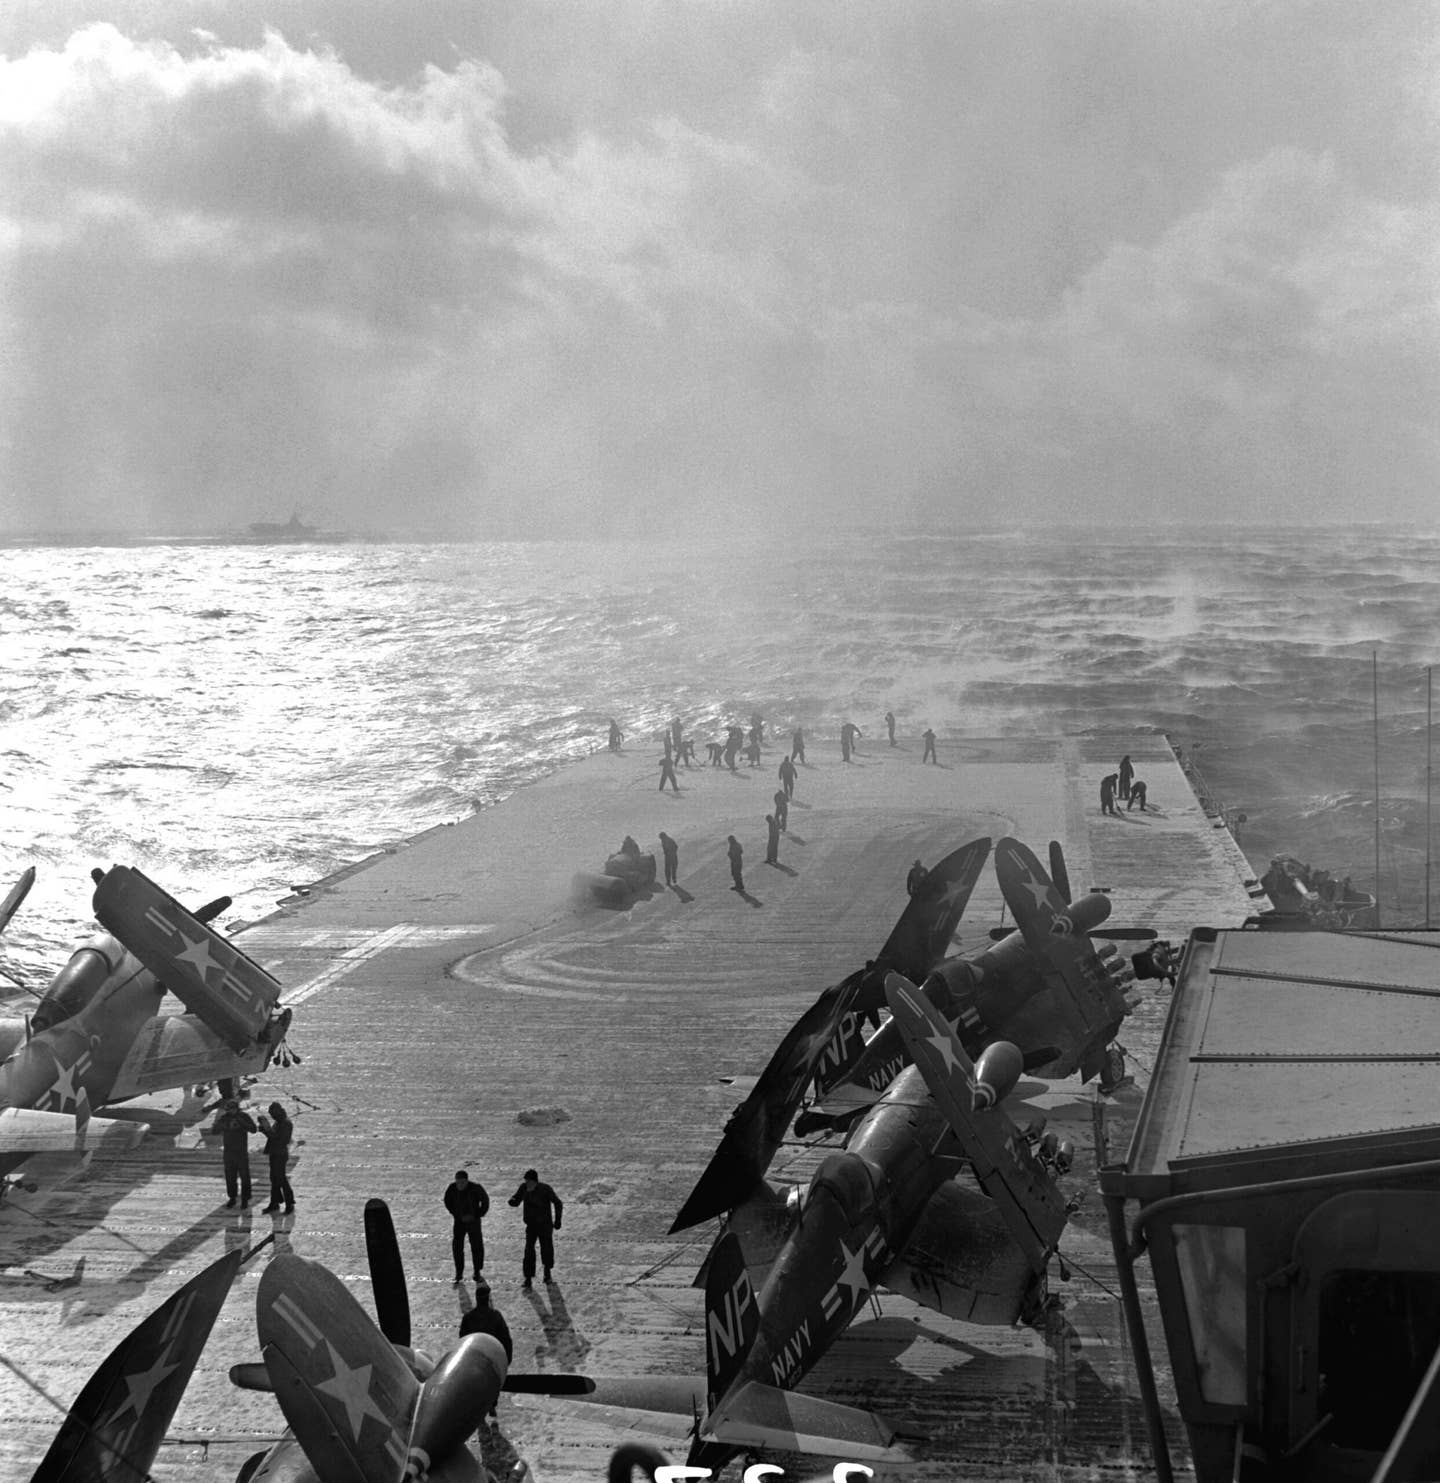 Sailors clean snow off the flight deck of the aircraft carrier USS&nbsp;<em>Oriskany</em>&nbsp;off Korea, on February 10, 1953. Visible on deck are F4U-5N&nbsp;Corsair&nbsp;fighters and an AD-3W&nbsp;Skyraider&nbsp;airborne early warning aircraft. <em>U.S. National Archives</em>&nbsp;